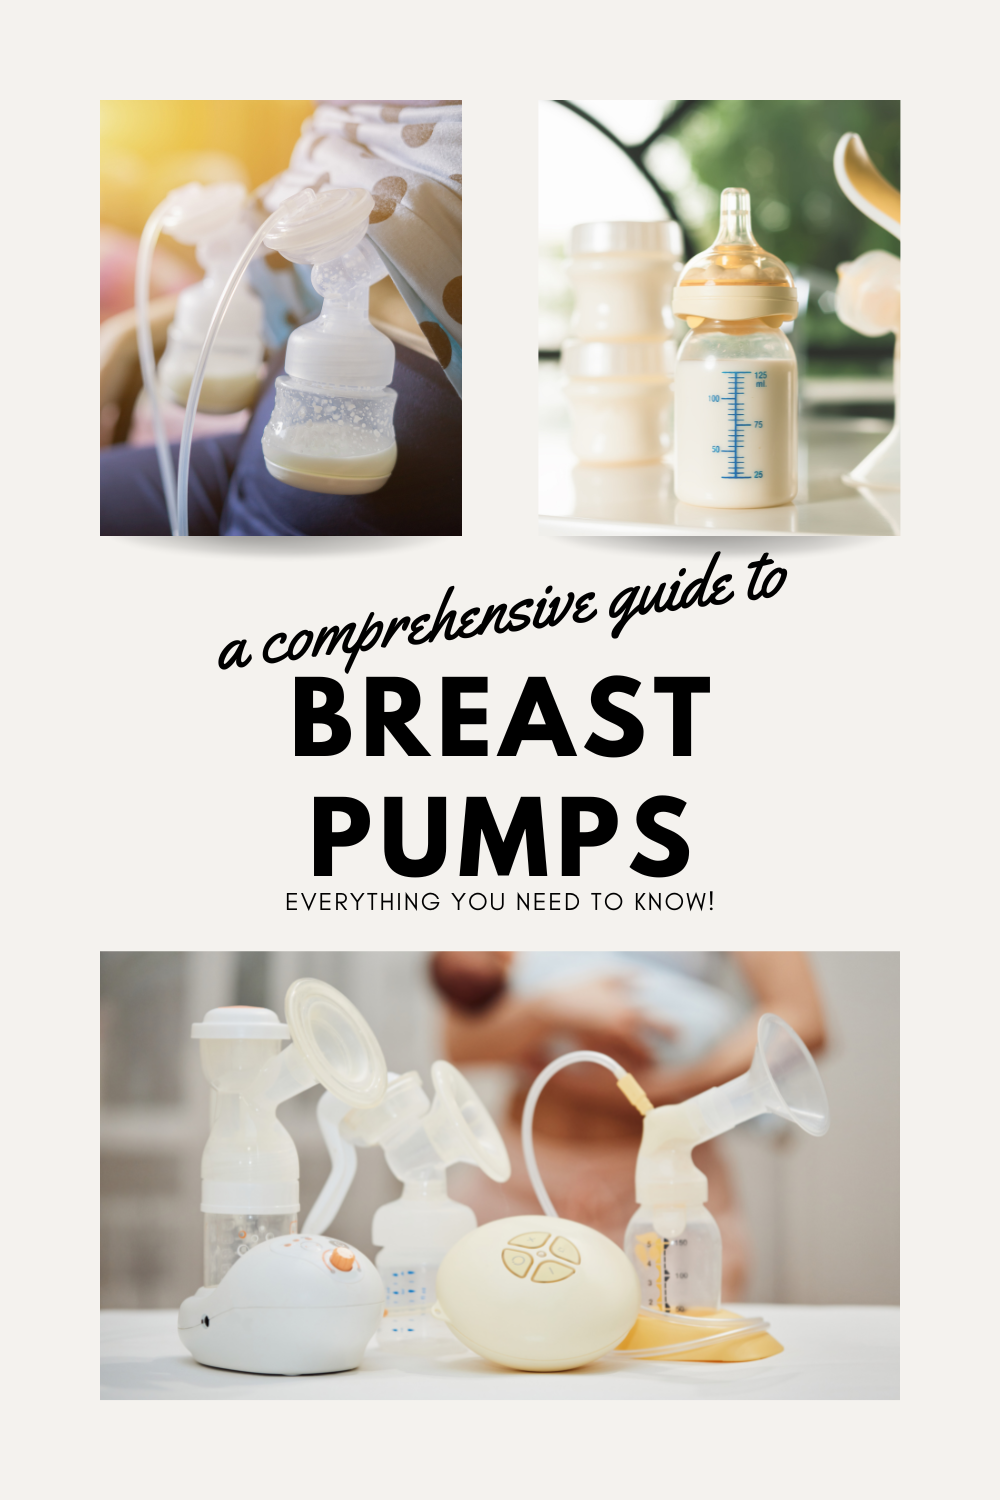 Everything You Need to Know About Breast Pumps